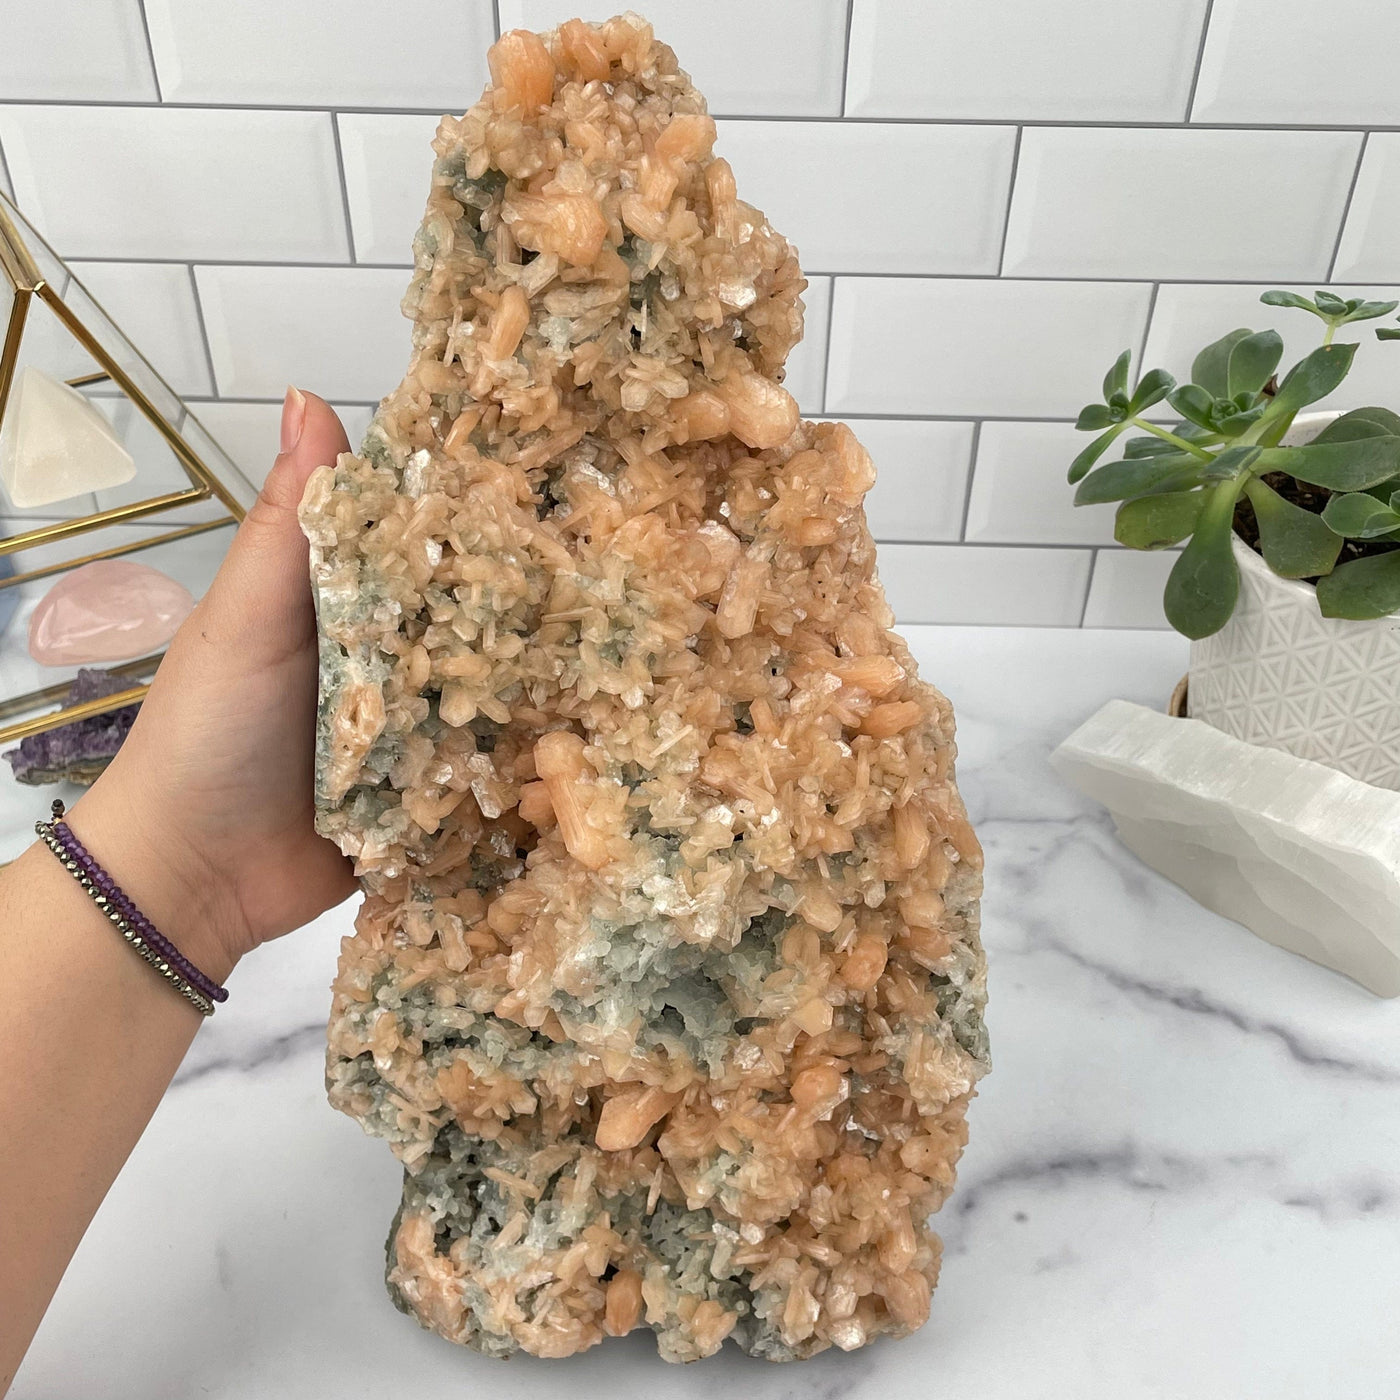 Peach Zeolite And Green Apophyllite Formation in hand for size reference 